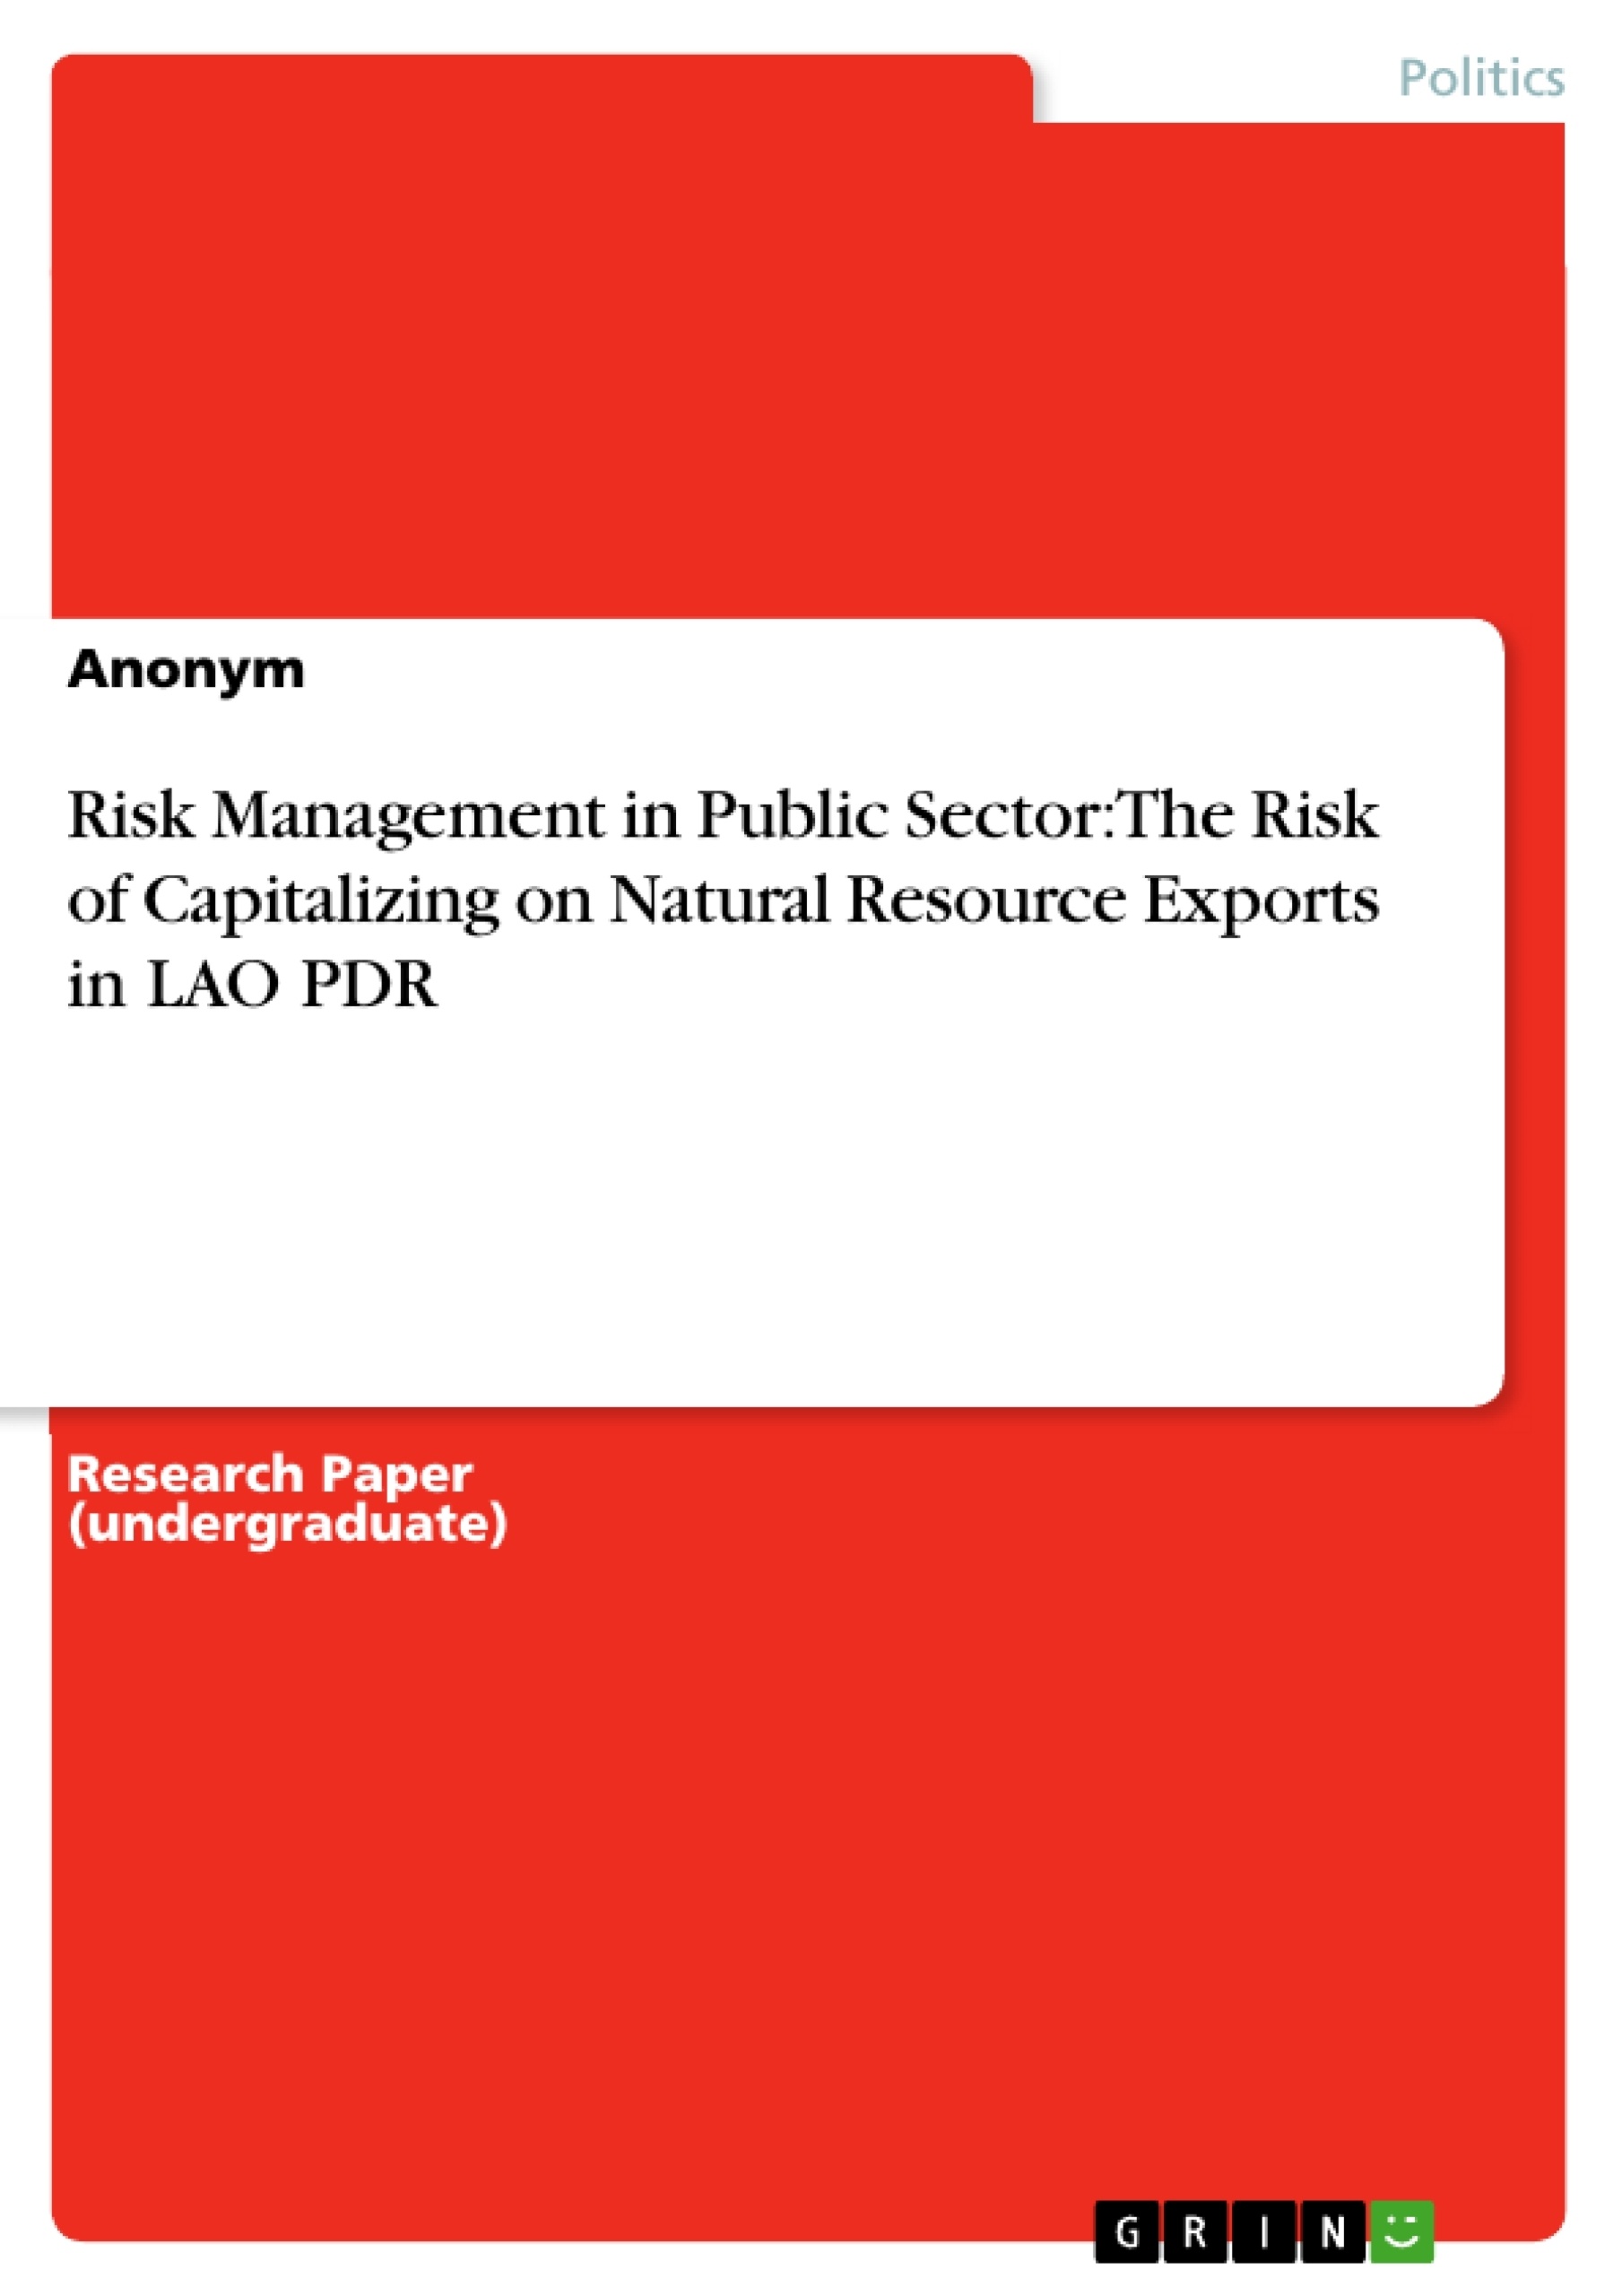 Title: Risk Management in Public Sector: The Risk of Capitalizing on Natural Resource Exports in LAO PDR